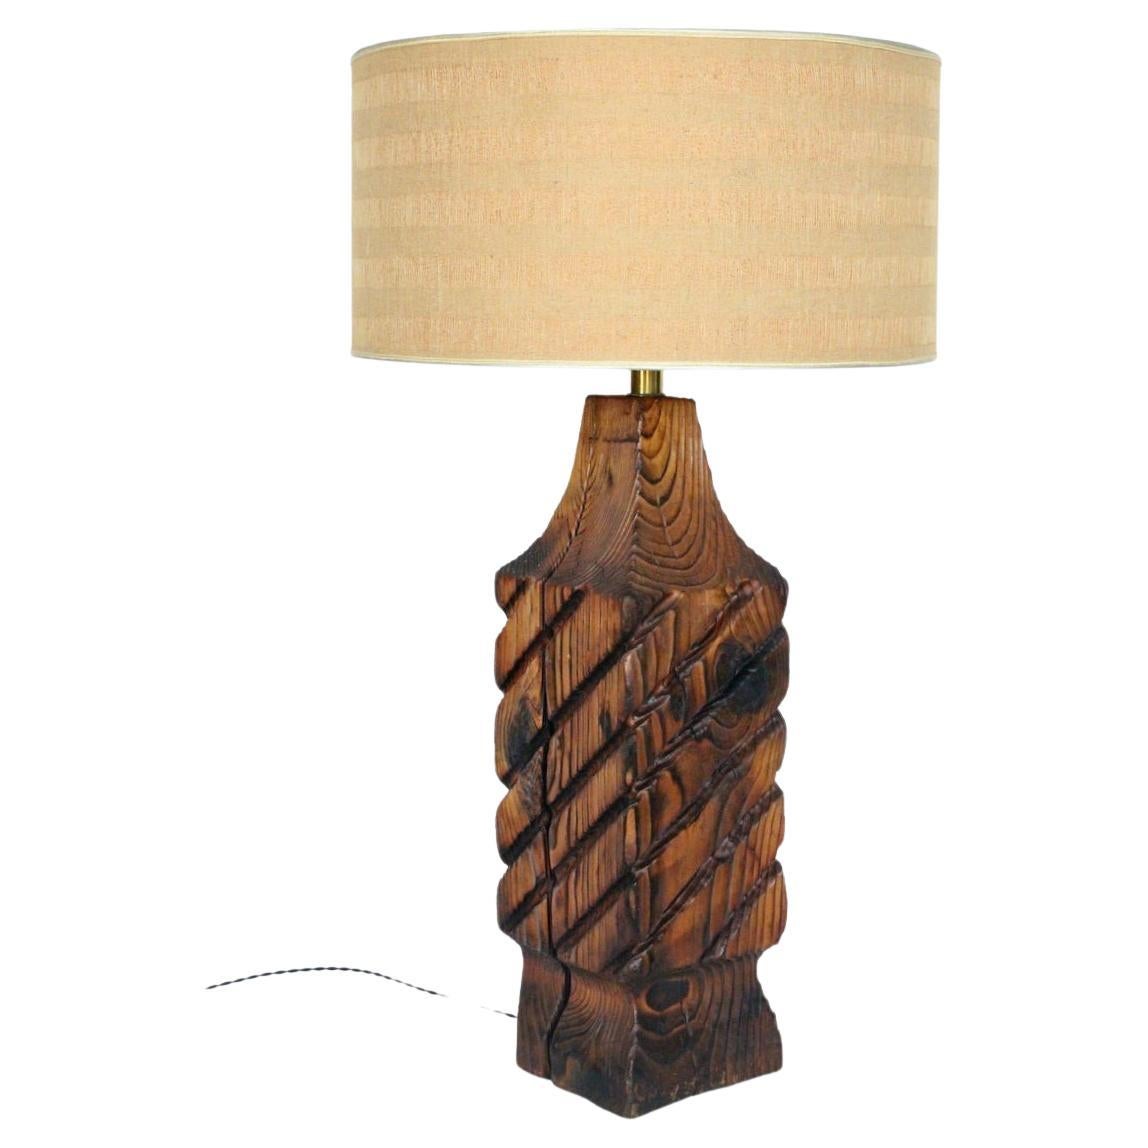 Tall California Rustic William Westerhaver WITCO Studio Cedar Table Lamp, Circa 1960. Three foot high with small footprint.. Featuring a handcrafted, burned and brushed rectangular old solid Cedar block, with diagonal cuts atop a (7W x 7.5D)